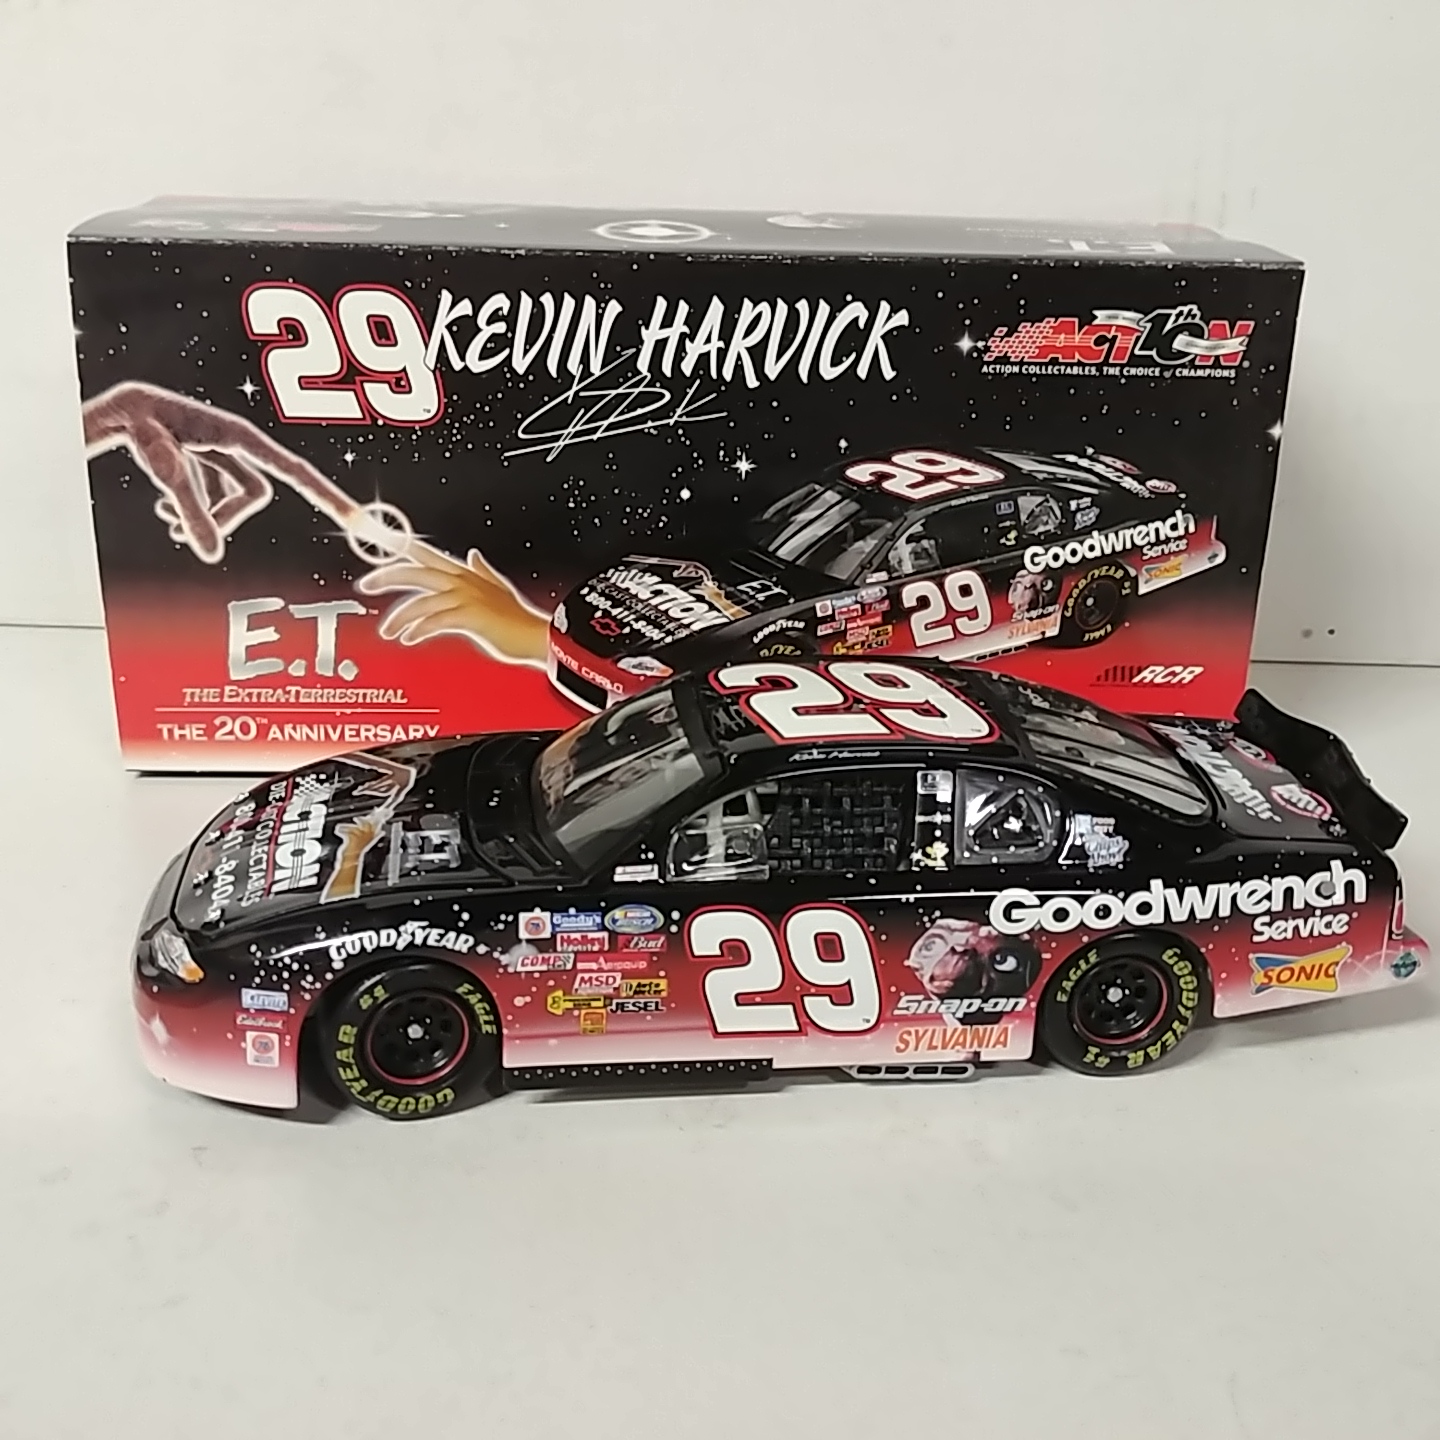 2002 Kevin Harvick 1/24th Action/Goodwrench "ET" "Busch Series" Monte Carlo